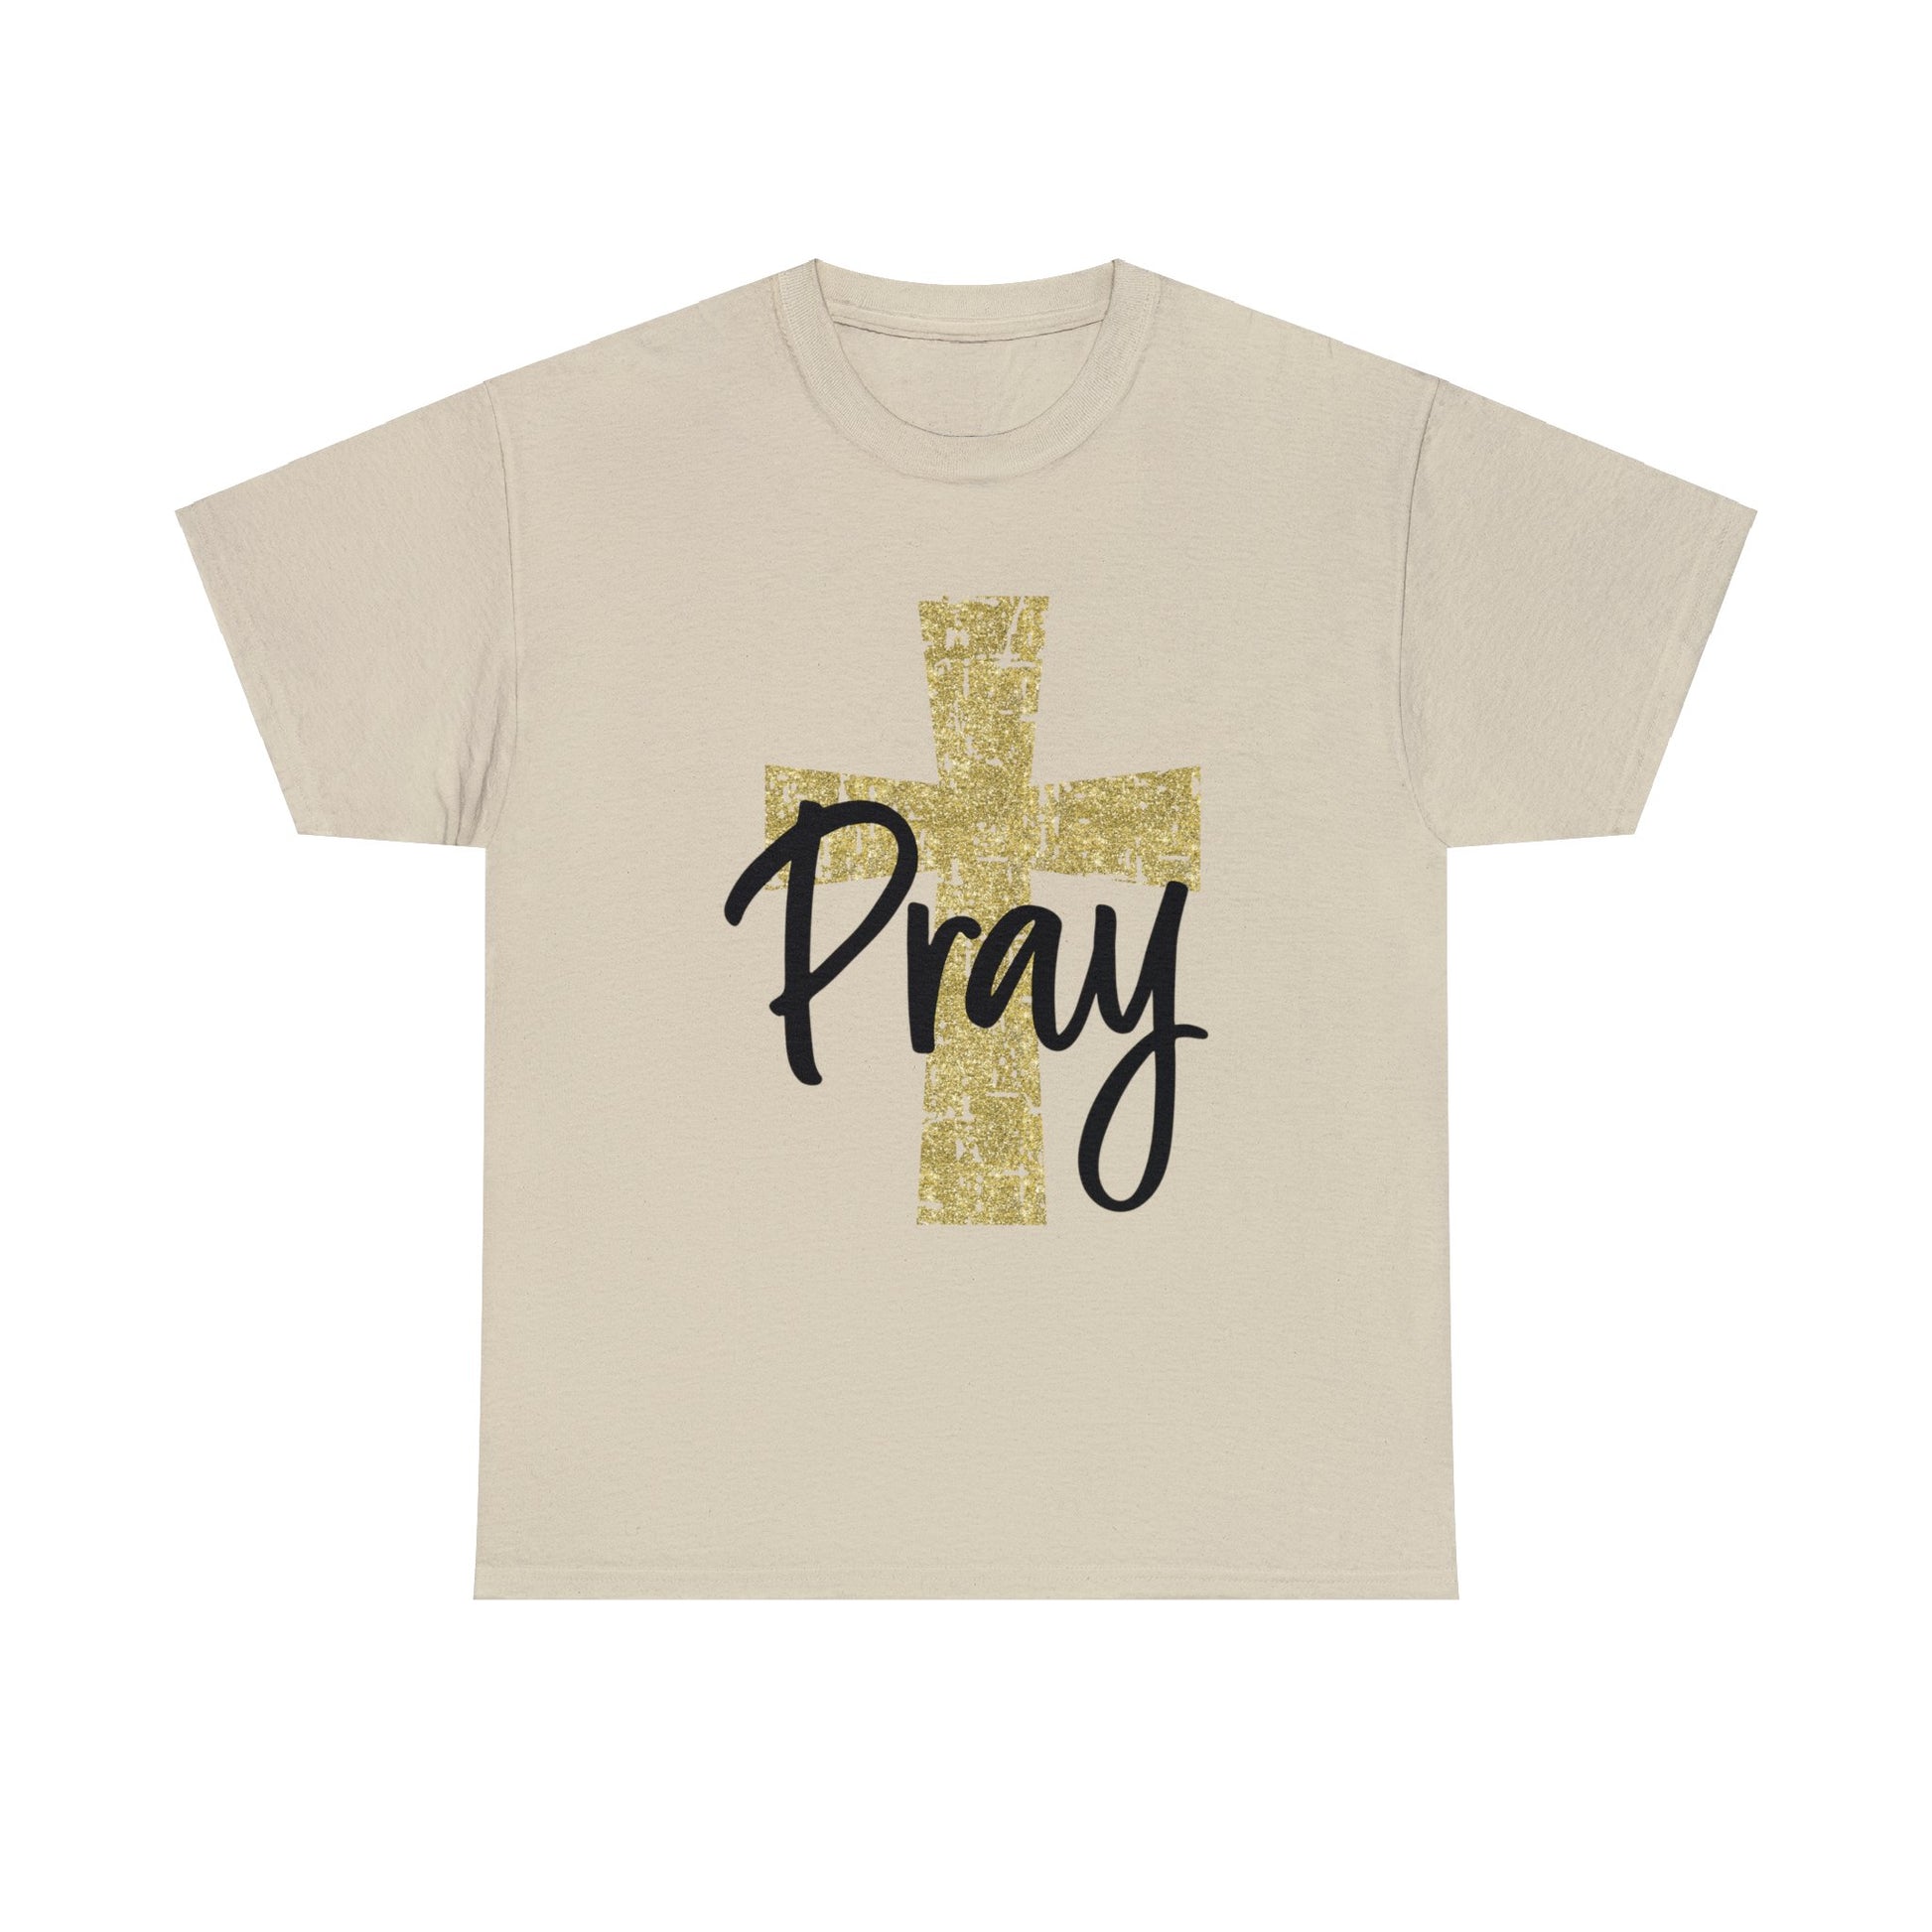 "Pray" T-Shirt - Weave Got Gifts - Unique Gifts You Won’t Find Anywhere Else!